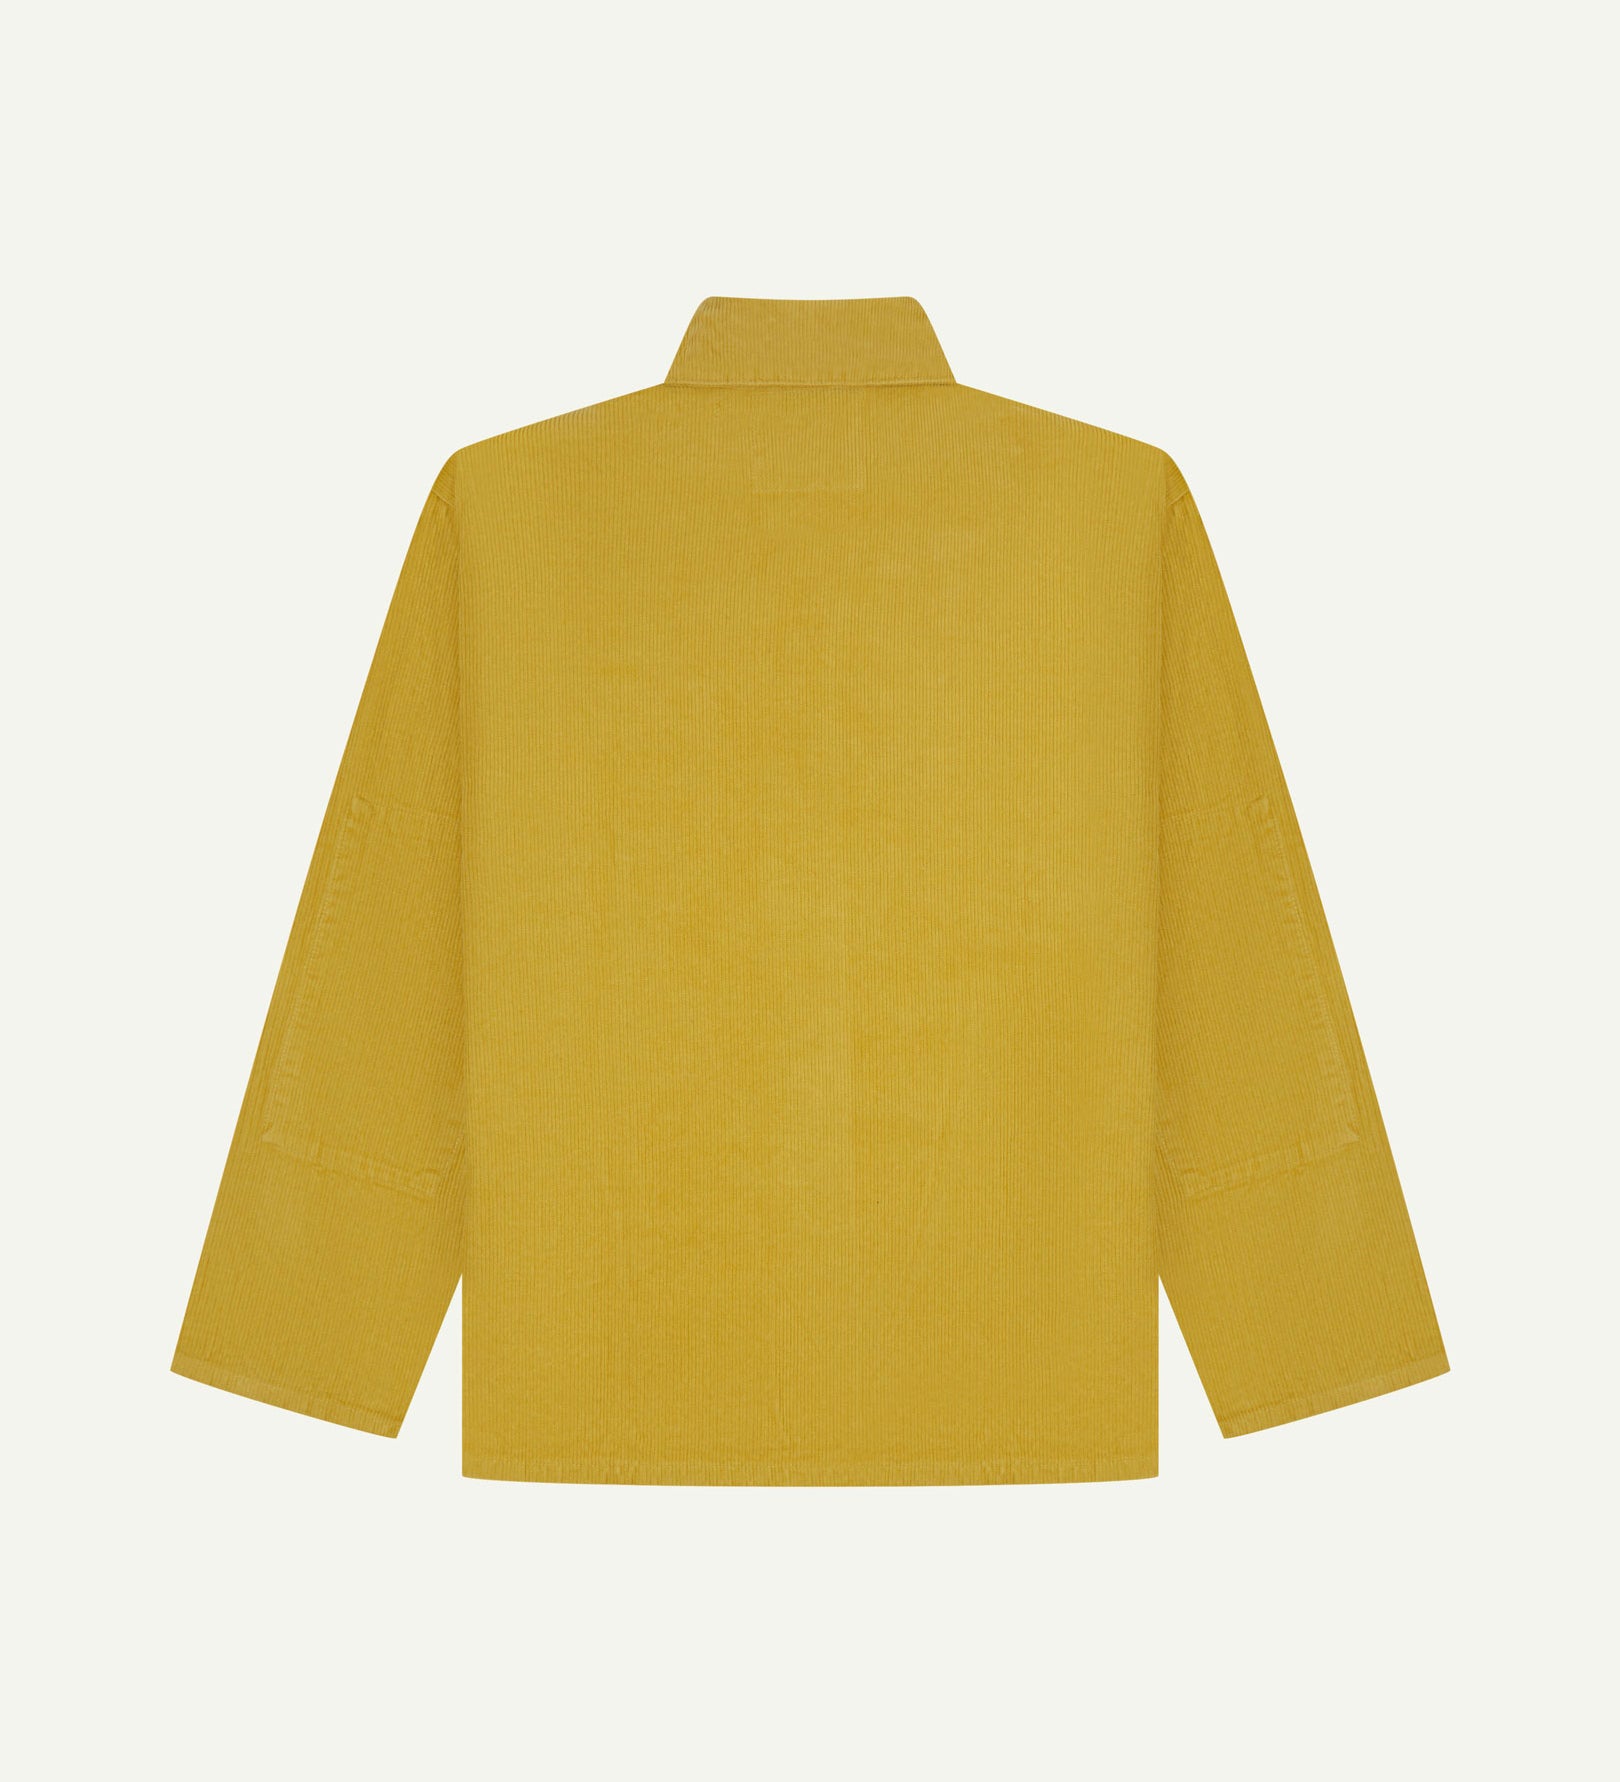 Back view of yellow (citronella), buttoned corduroy overshirt with view of reinforced elbow area and boxy silhouette.